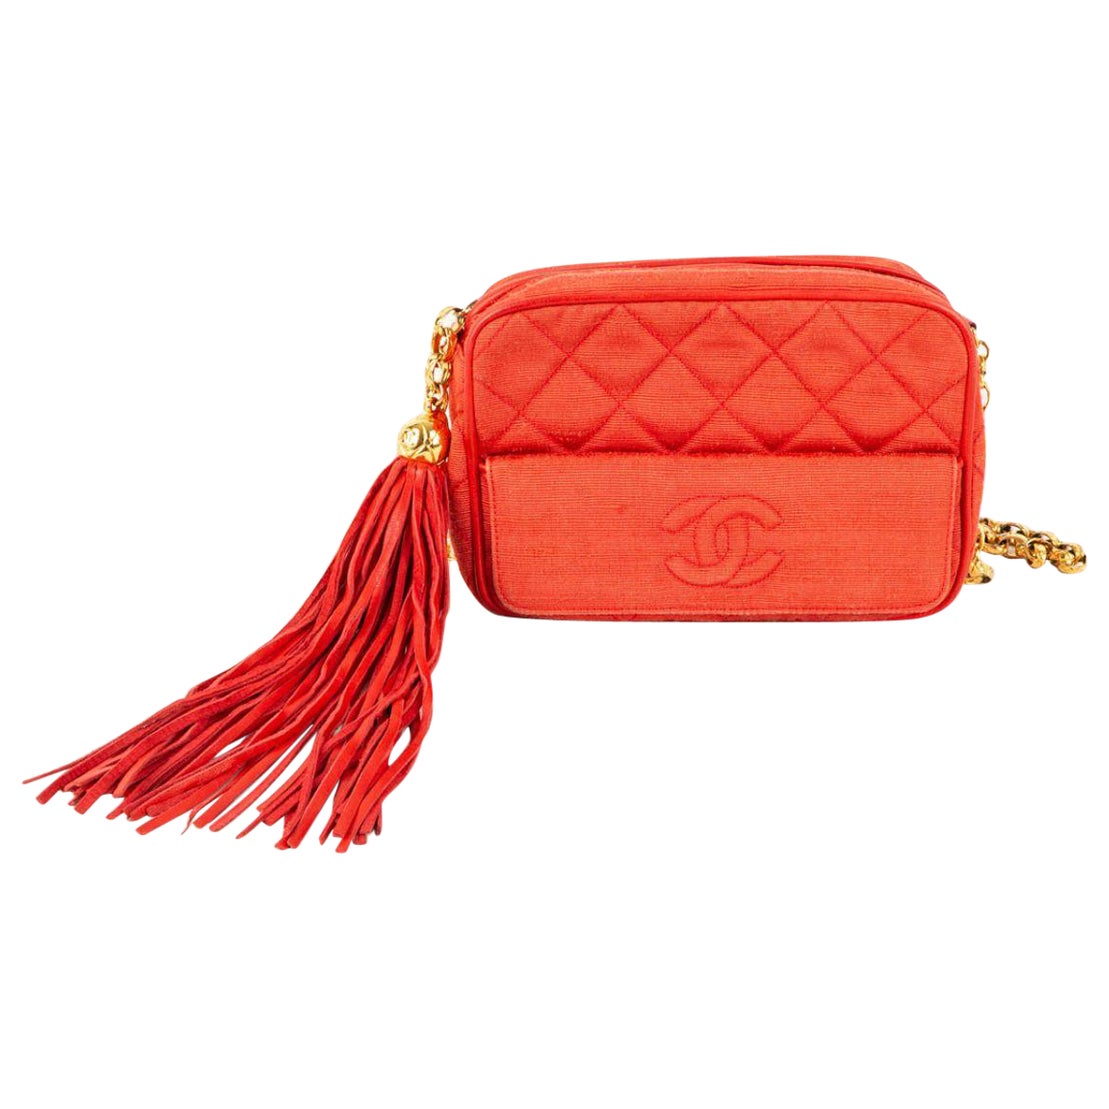 CHANEL, Bags, Auth Chanel Matelasse Womens Leather Chain Shoulder Bag Red  Color